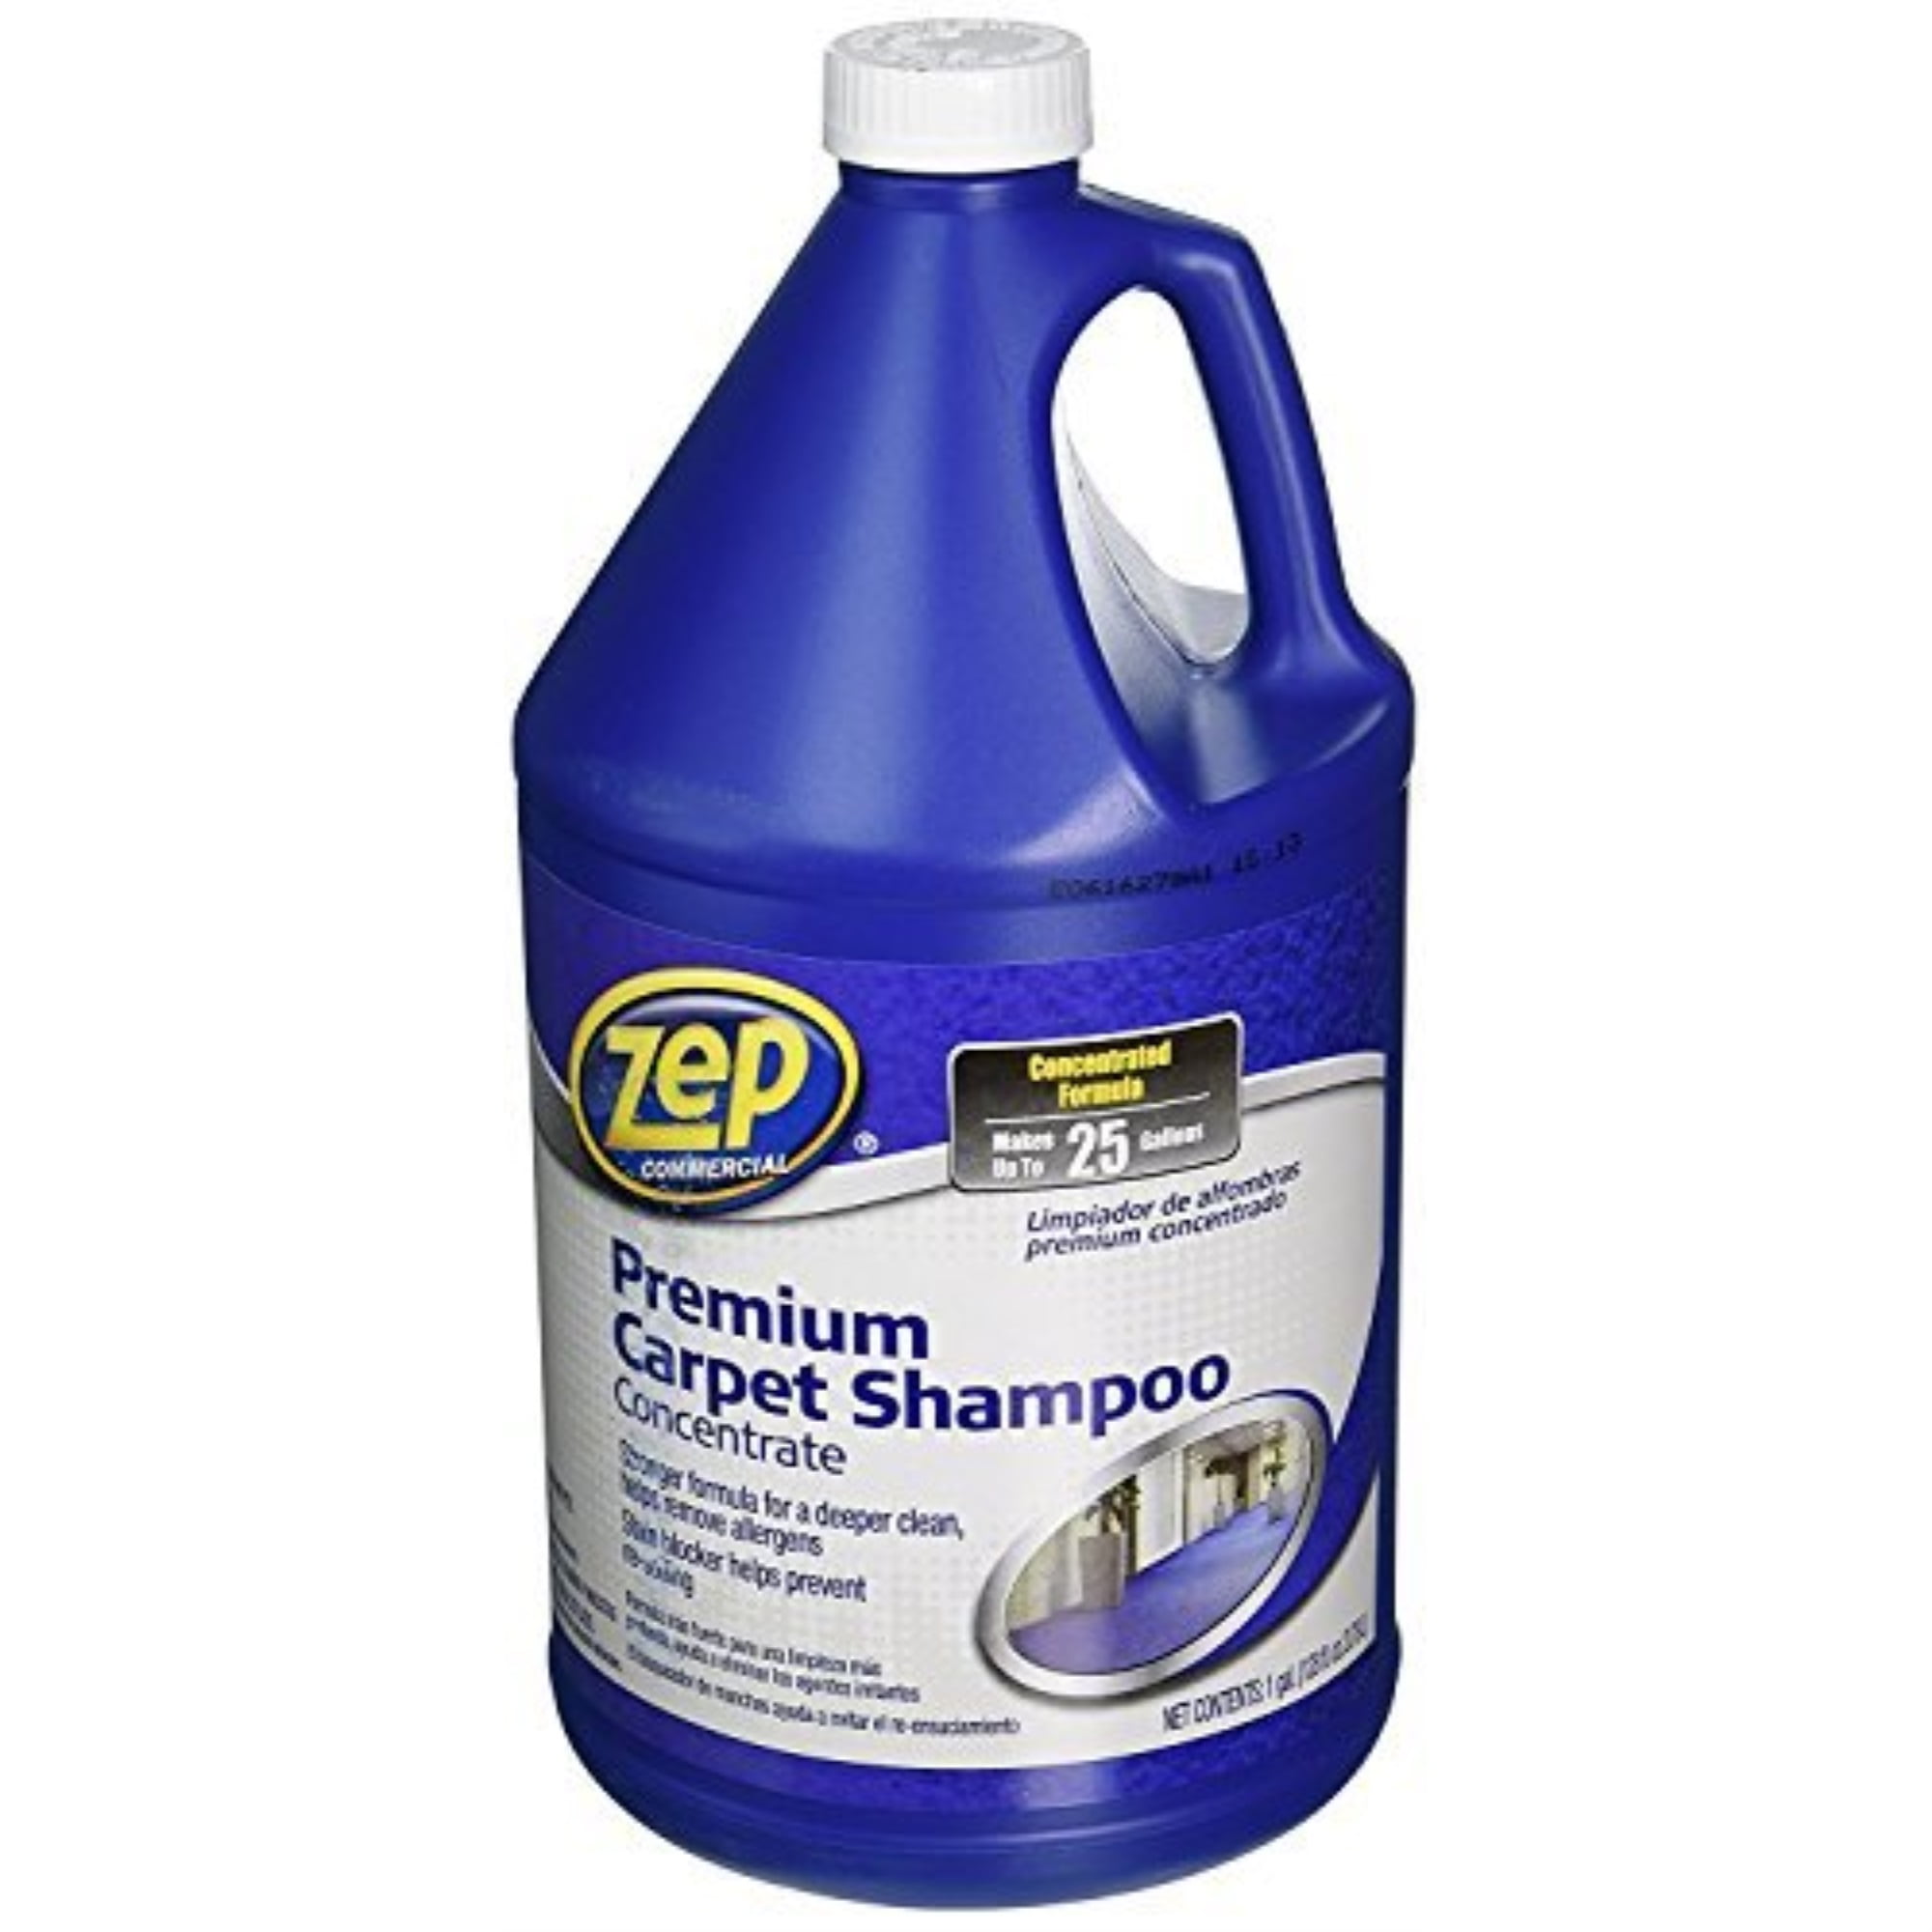 Zep Premium Pet Carpet Shampoo - 1 Gallon (Case of 2) ZUPPC128 -  Concentrated Pro Formula Removes Tough Pet Stains and Odors